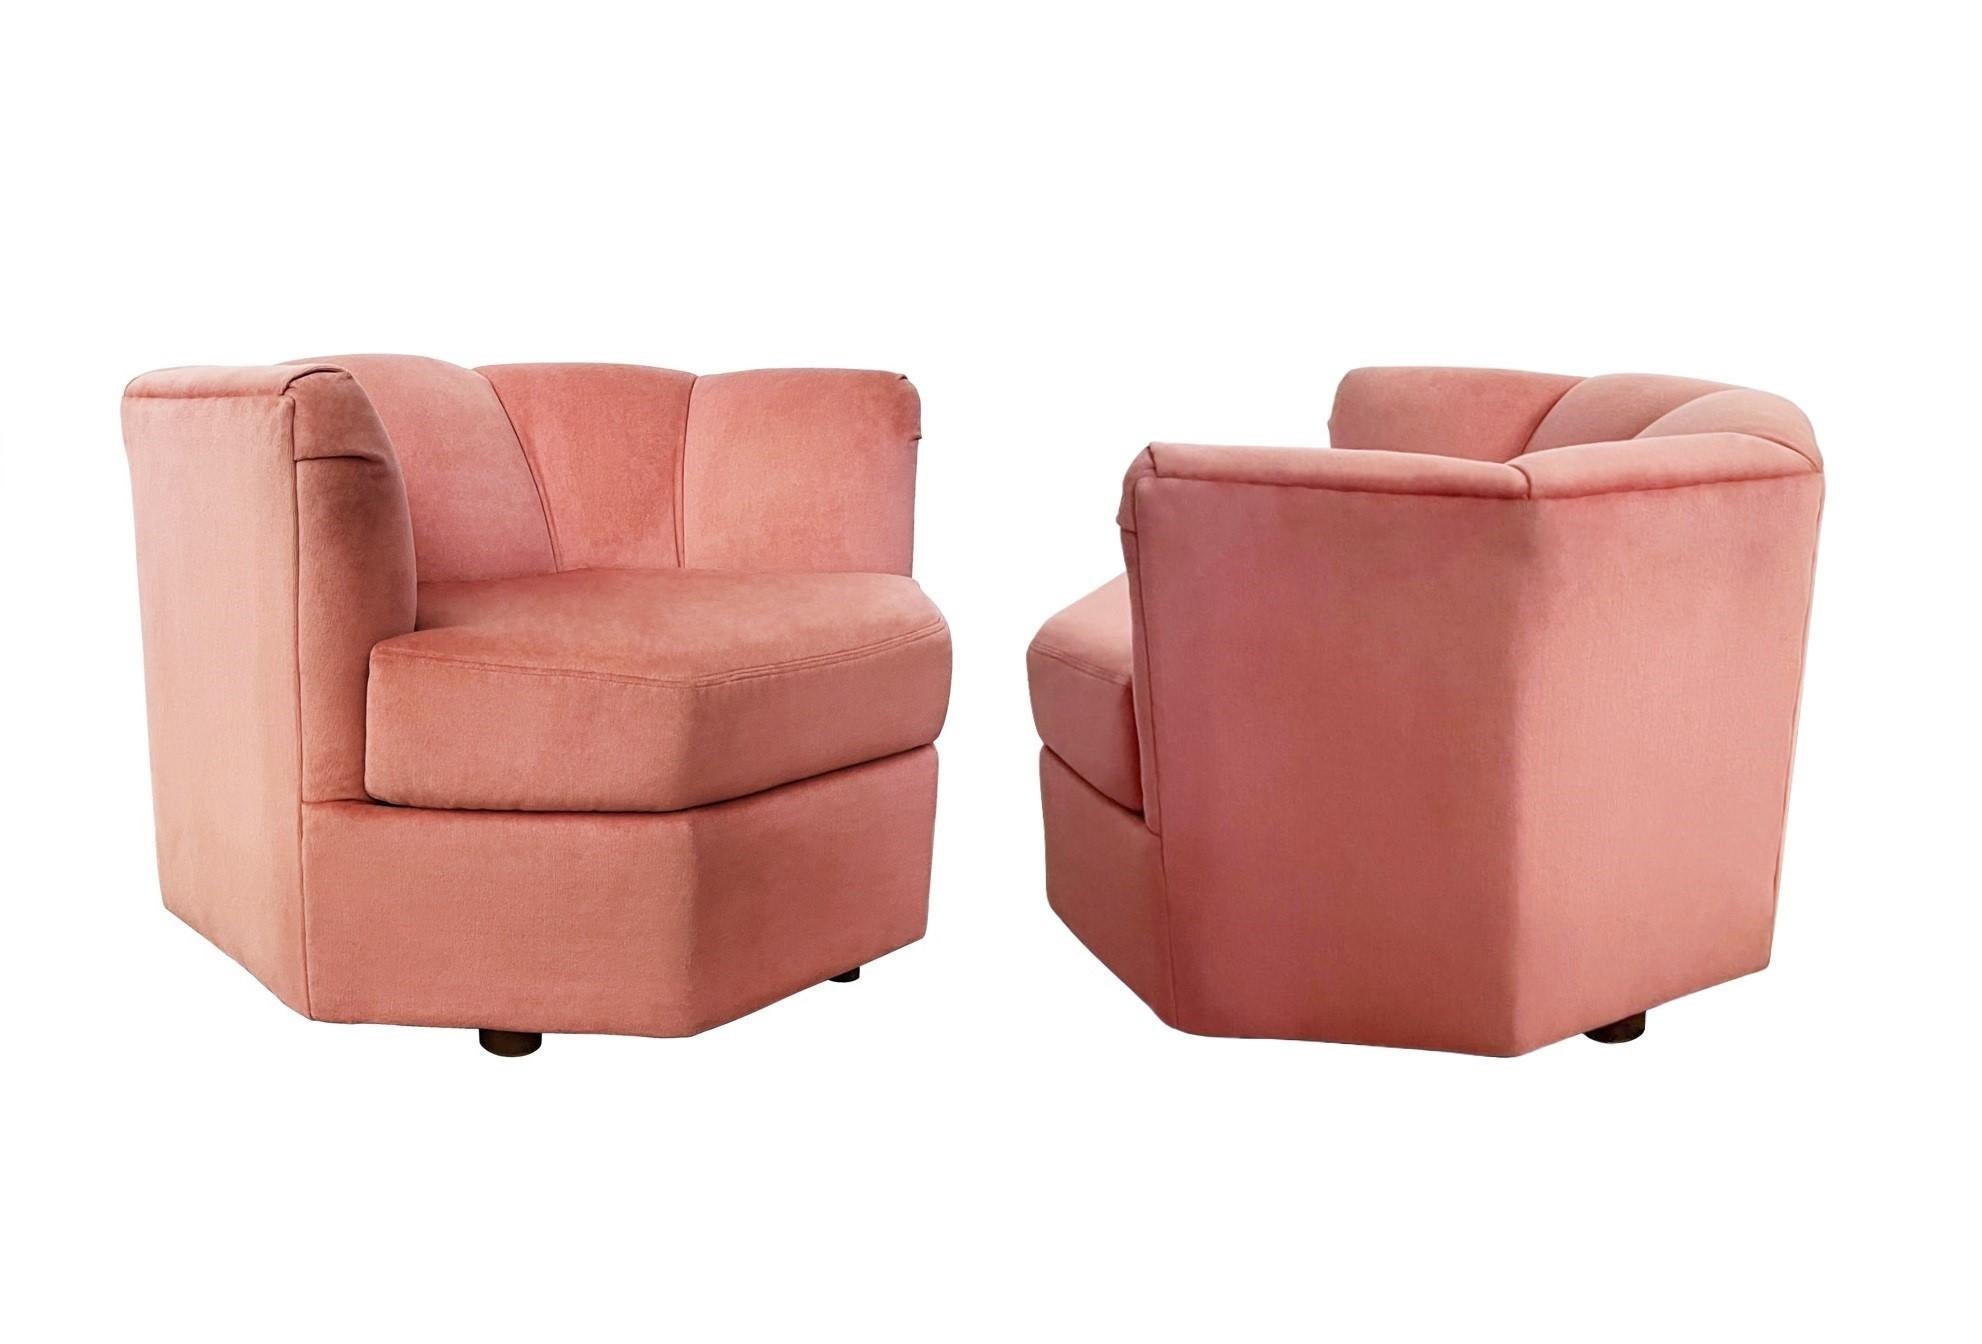 1970s Hexagonal Club Chairs in a Dusty Rose Velvet For Sale 5